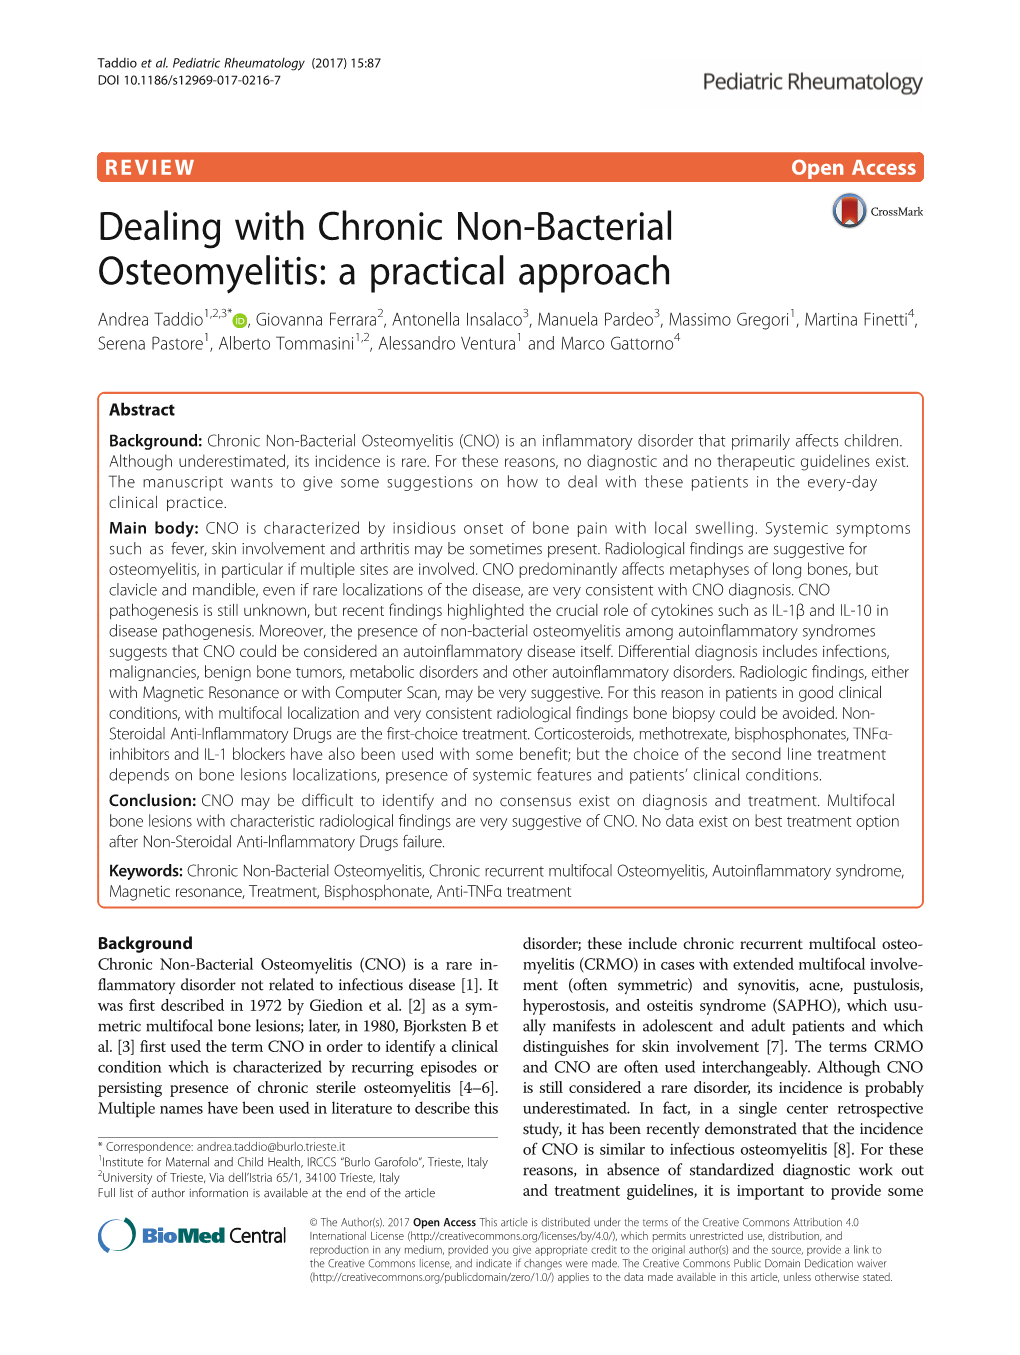 Dealing with Chronic Non-Bacterial Osteomyelitis: a Practical